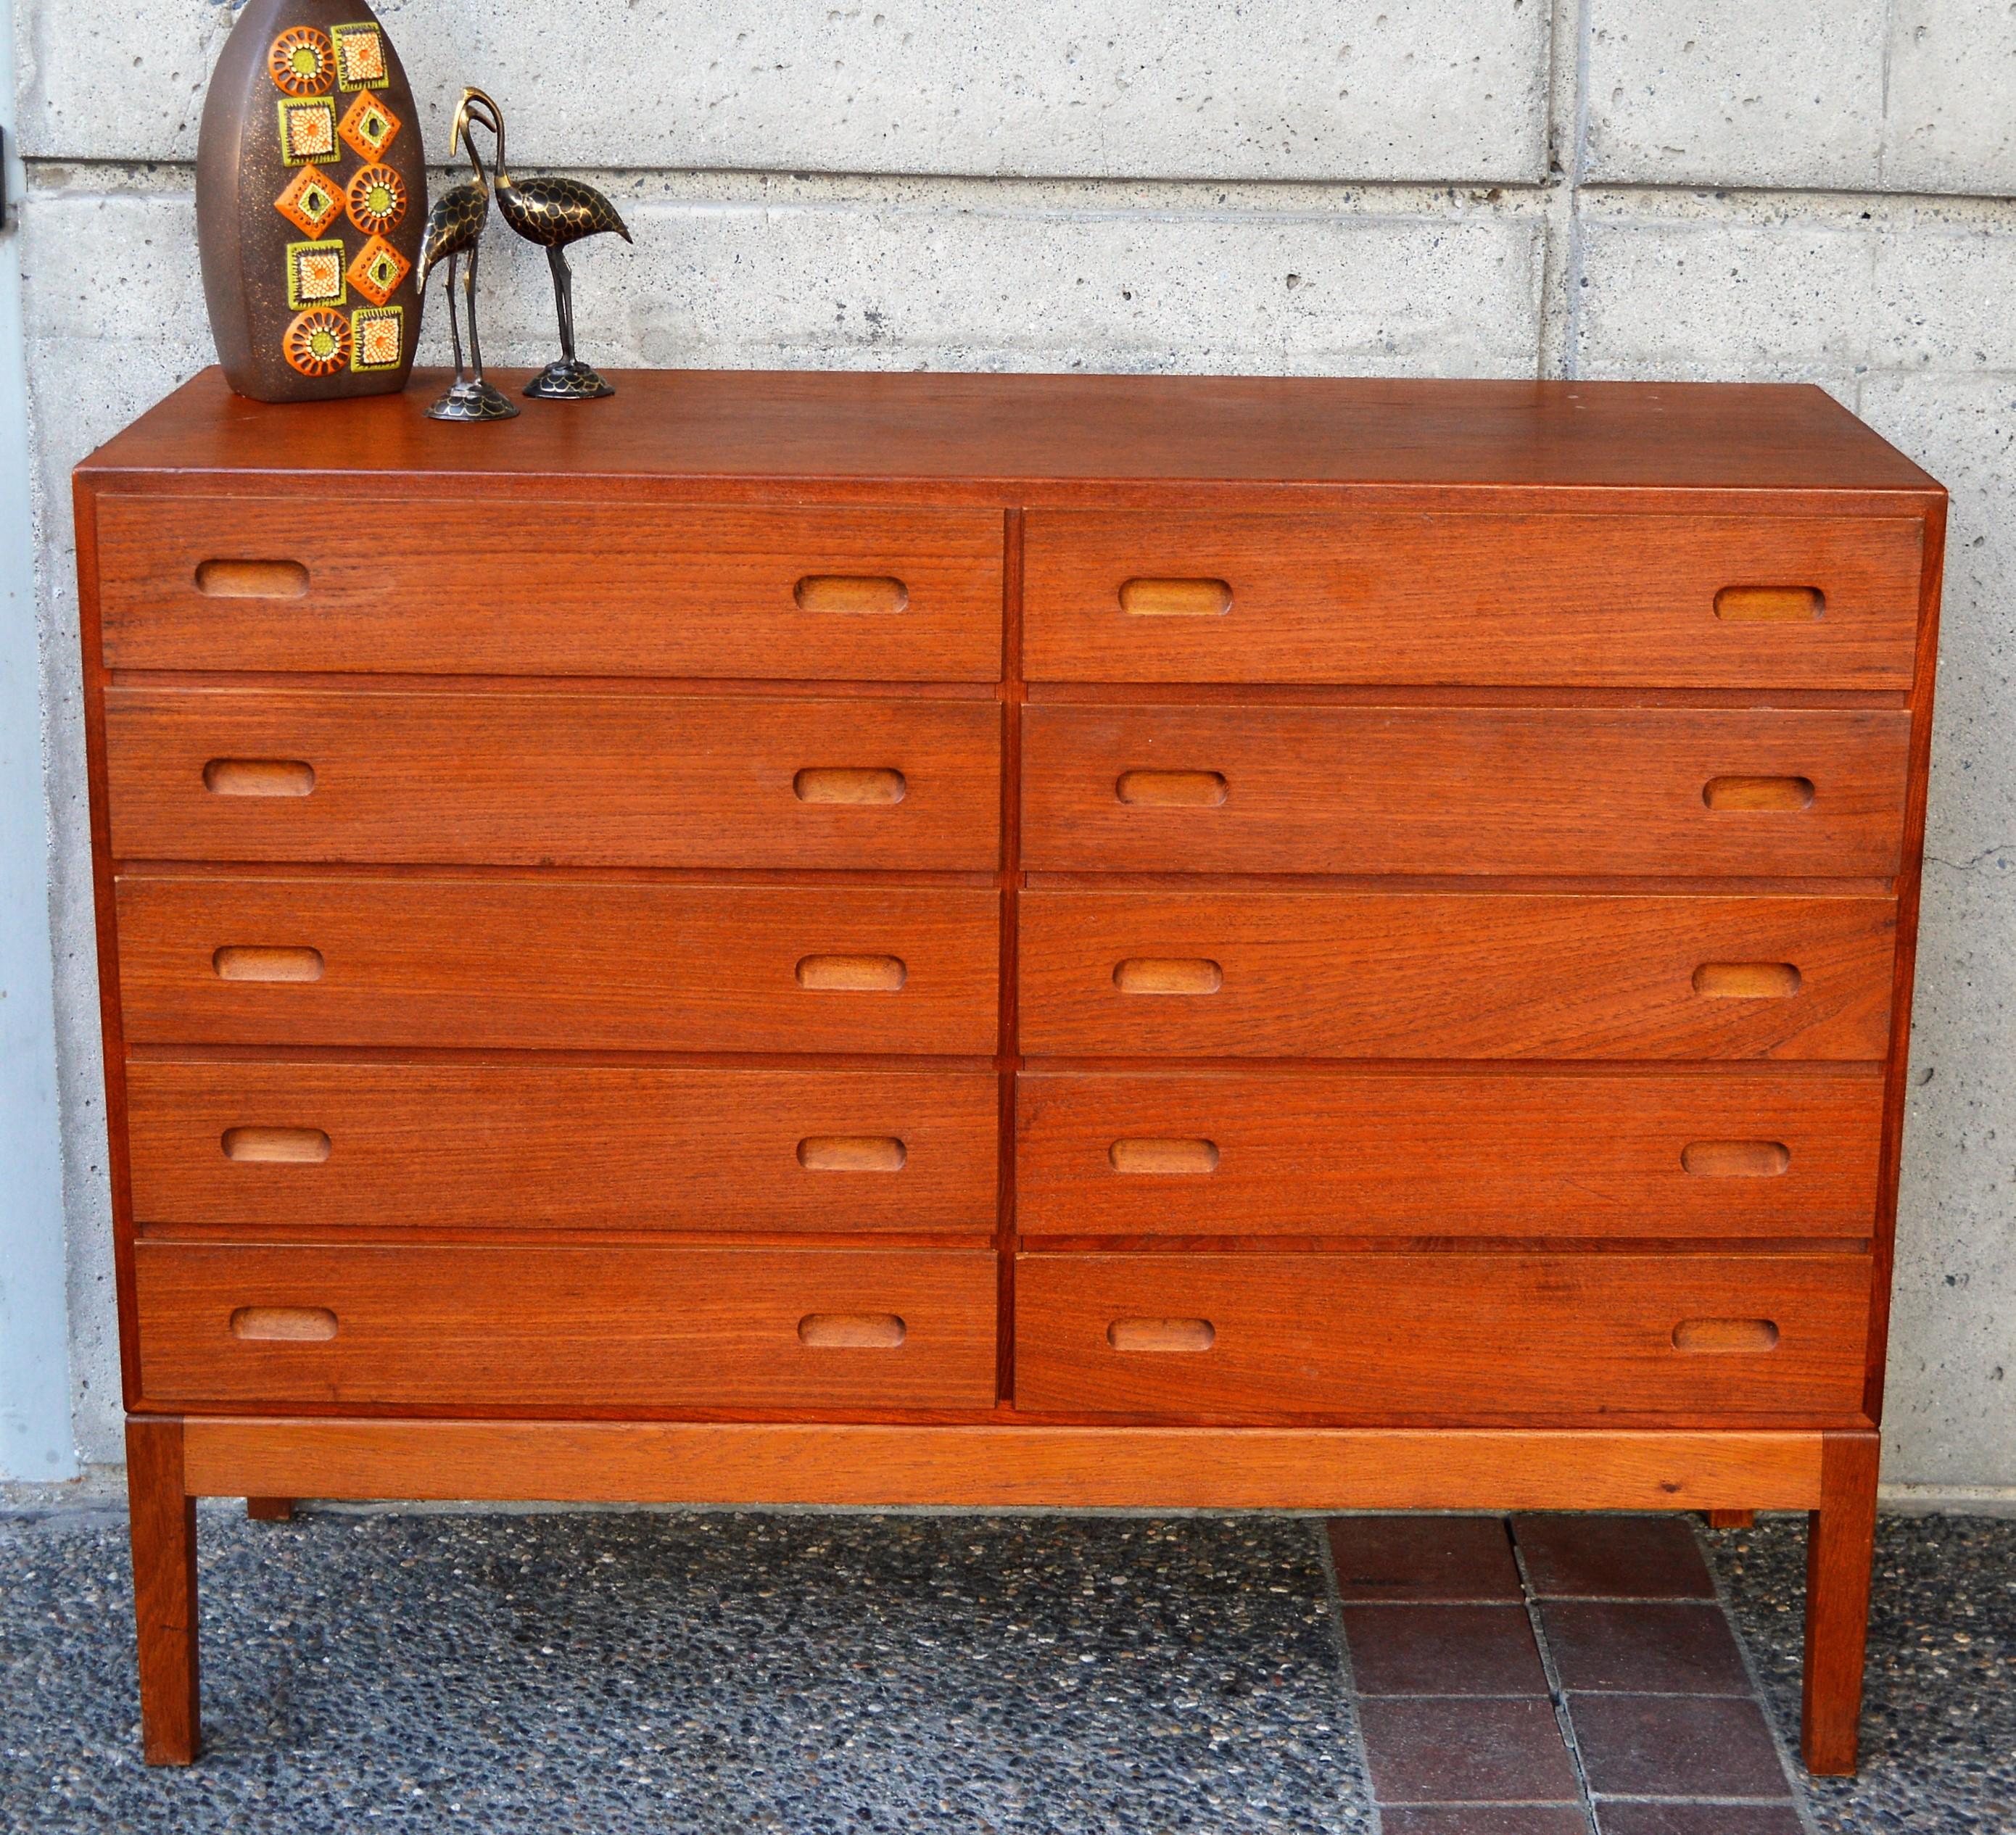 This rare and amazing quality Danish Modern teak taller 10-drawer dresser was designed by Borge Mogensen for FDB Mobler in the 1960s. The drawers all have solid wood drawer fronts with unusual cut-away ovoid drawer pulls, and oak frame construction